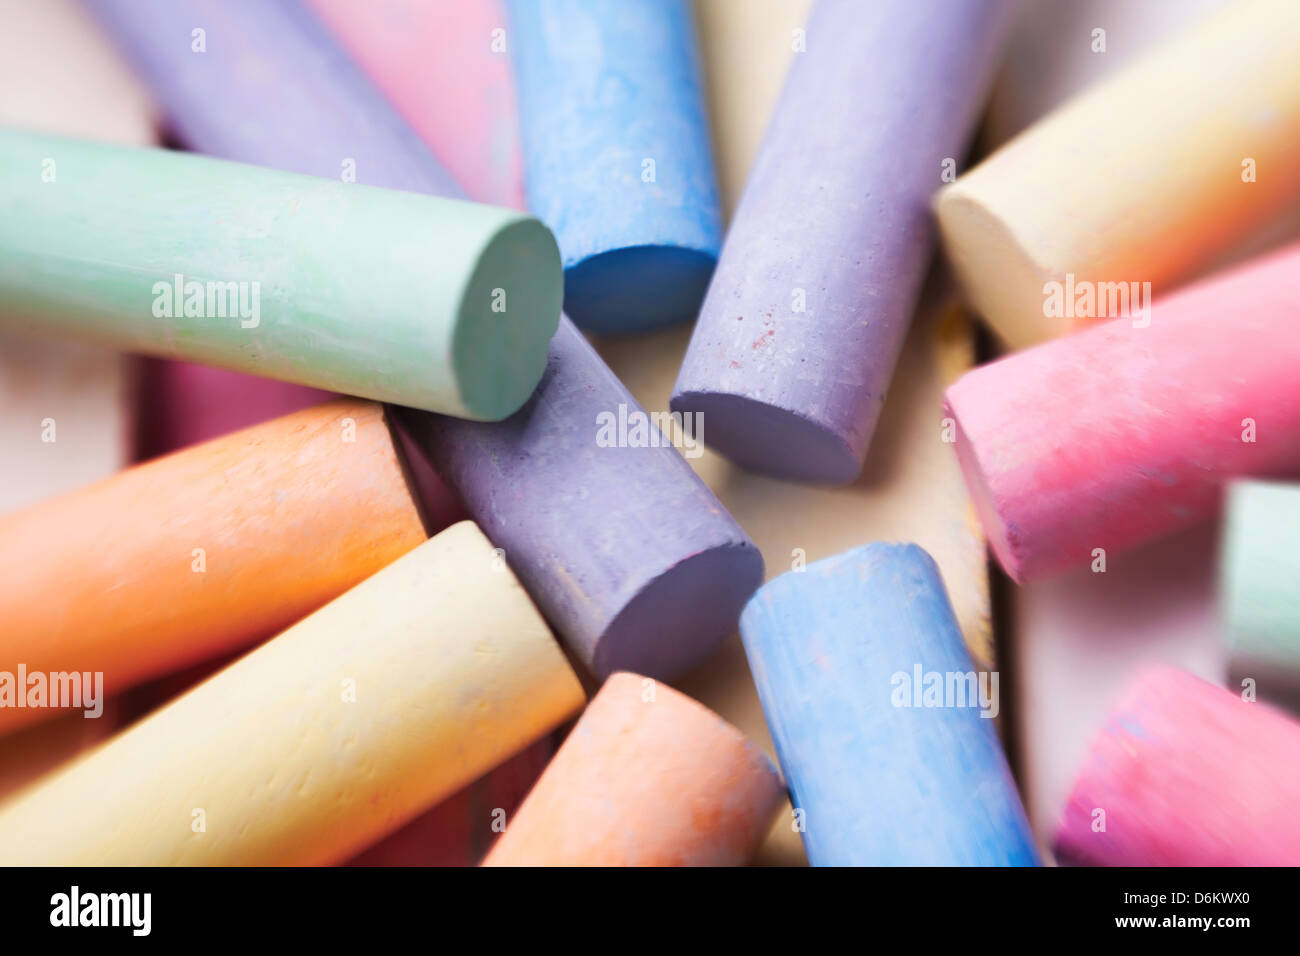 chalks pieces colorful full frame closeup Stock Photo